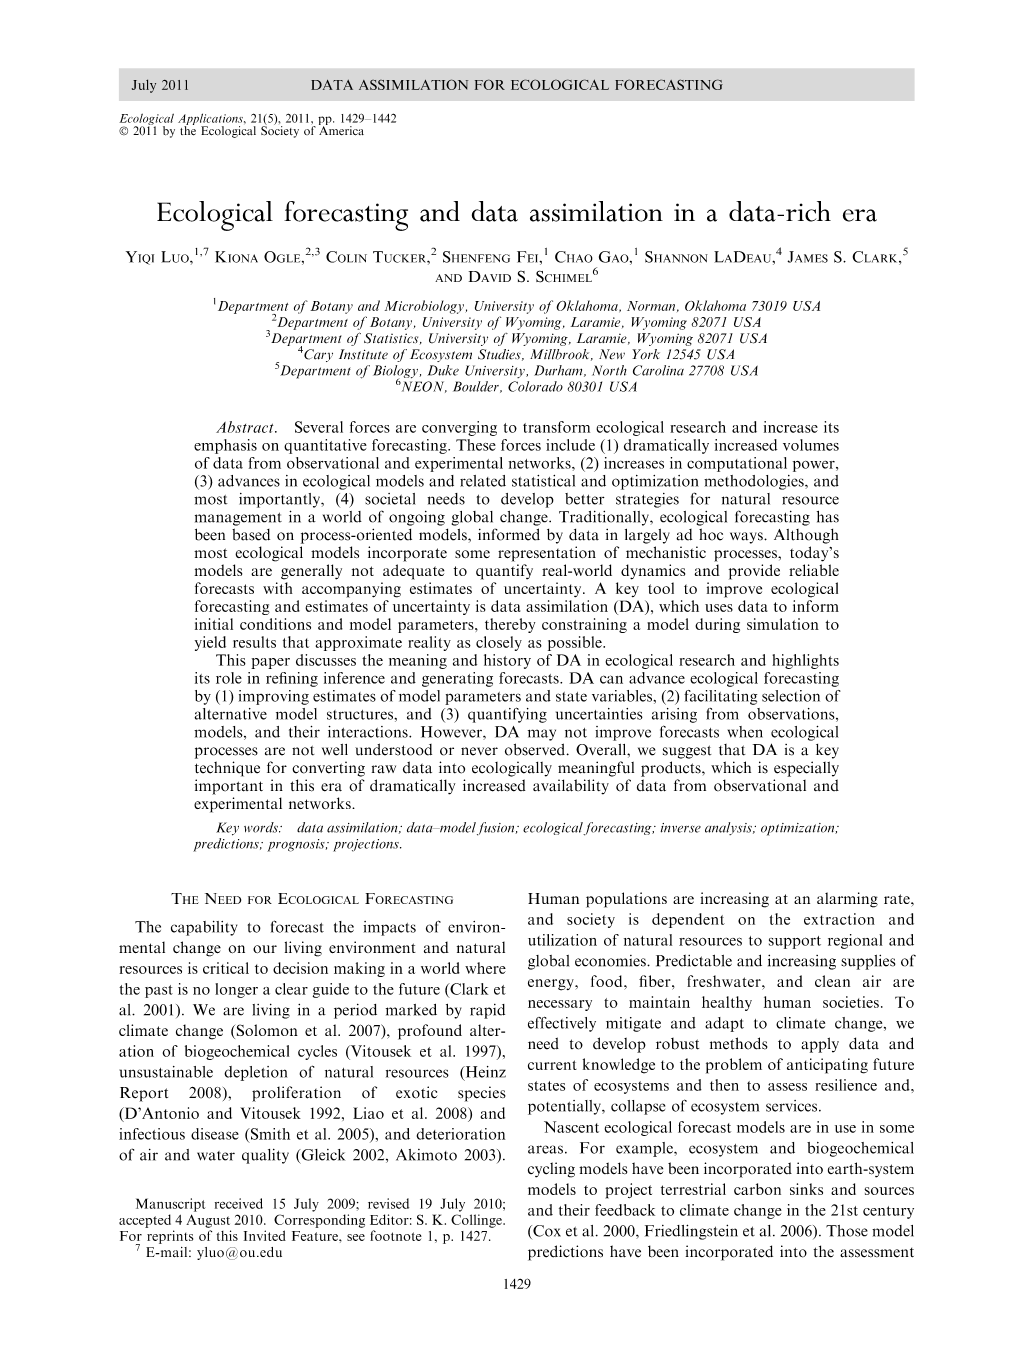 Ecological Forecasting and Data Assimilation in a Data-Rich Era